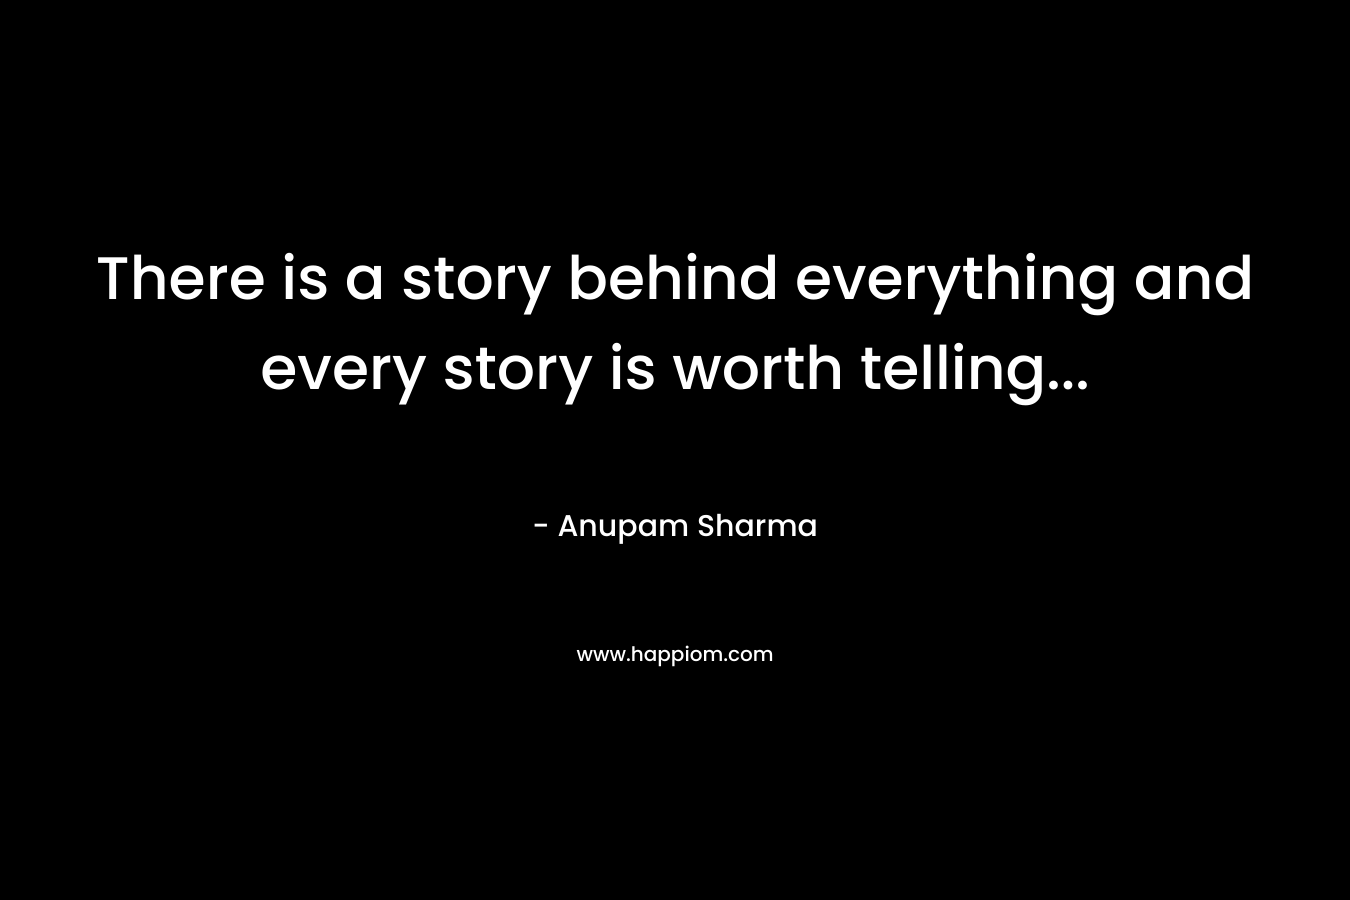 There is a story behind everything and every story is worth telling...